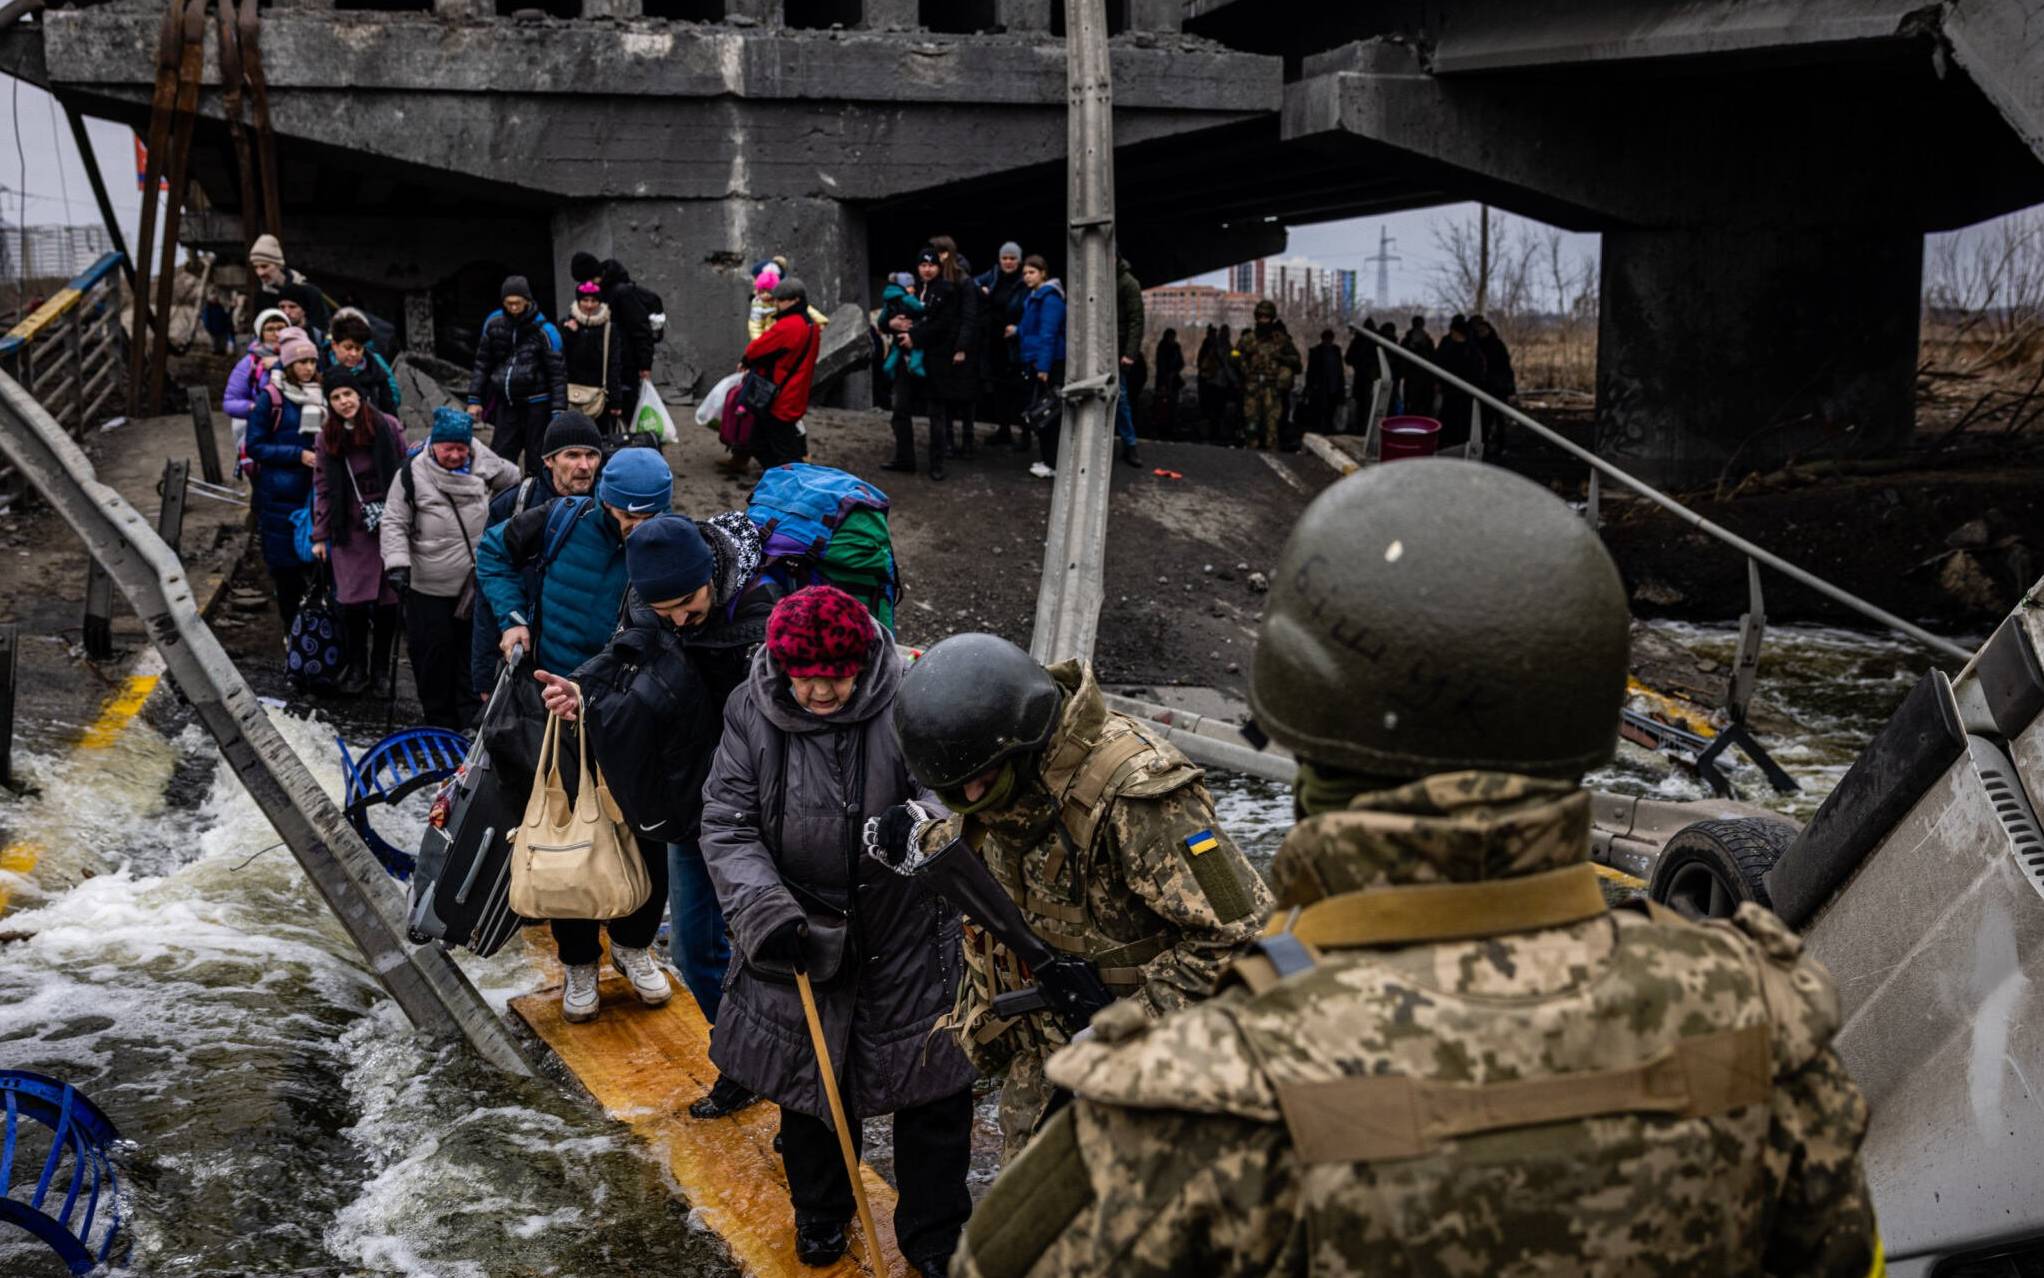 Evacuees cross a destroyed bridge as they flee the city of Irpin, northwest of Kyiv, on March 7, 2022. - Ukraine dismissed Moscow's offer to set up humanitarian corridors from several bombarded cities on Monday after it emerged some routes would lead refugees into Russia or Belarus. The Russian proposal of safe passage from Kharkiv, Kyiv, Mariupol and Sumy had come after terrified Ukrainian civilians came under fire in previous ceasefire attempts. (Photo by Dimitar DILKOFF / AFP)